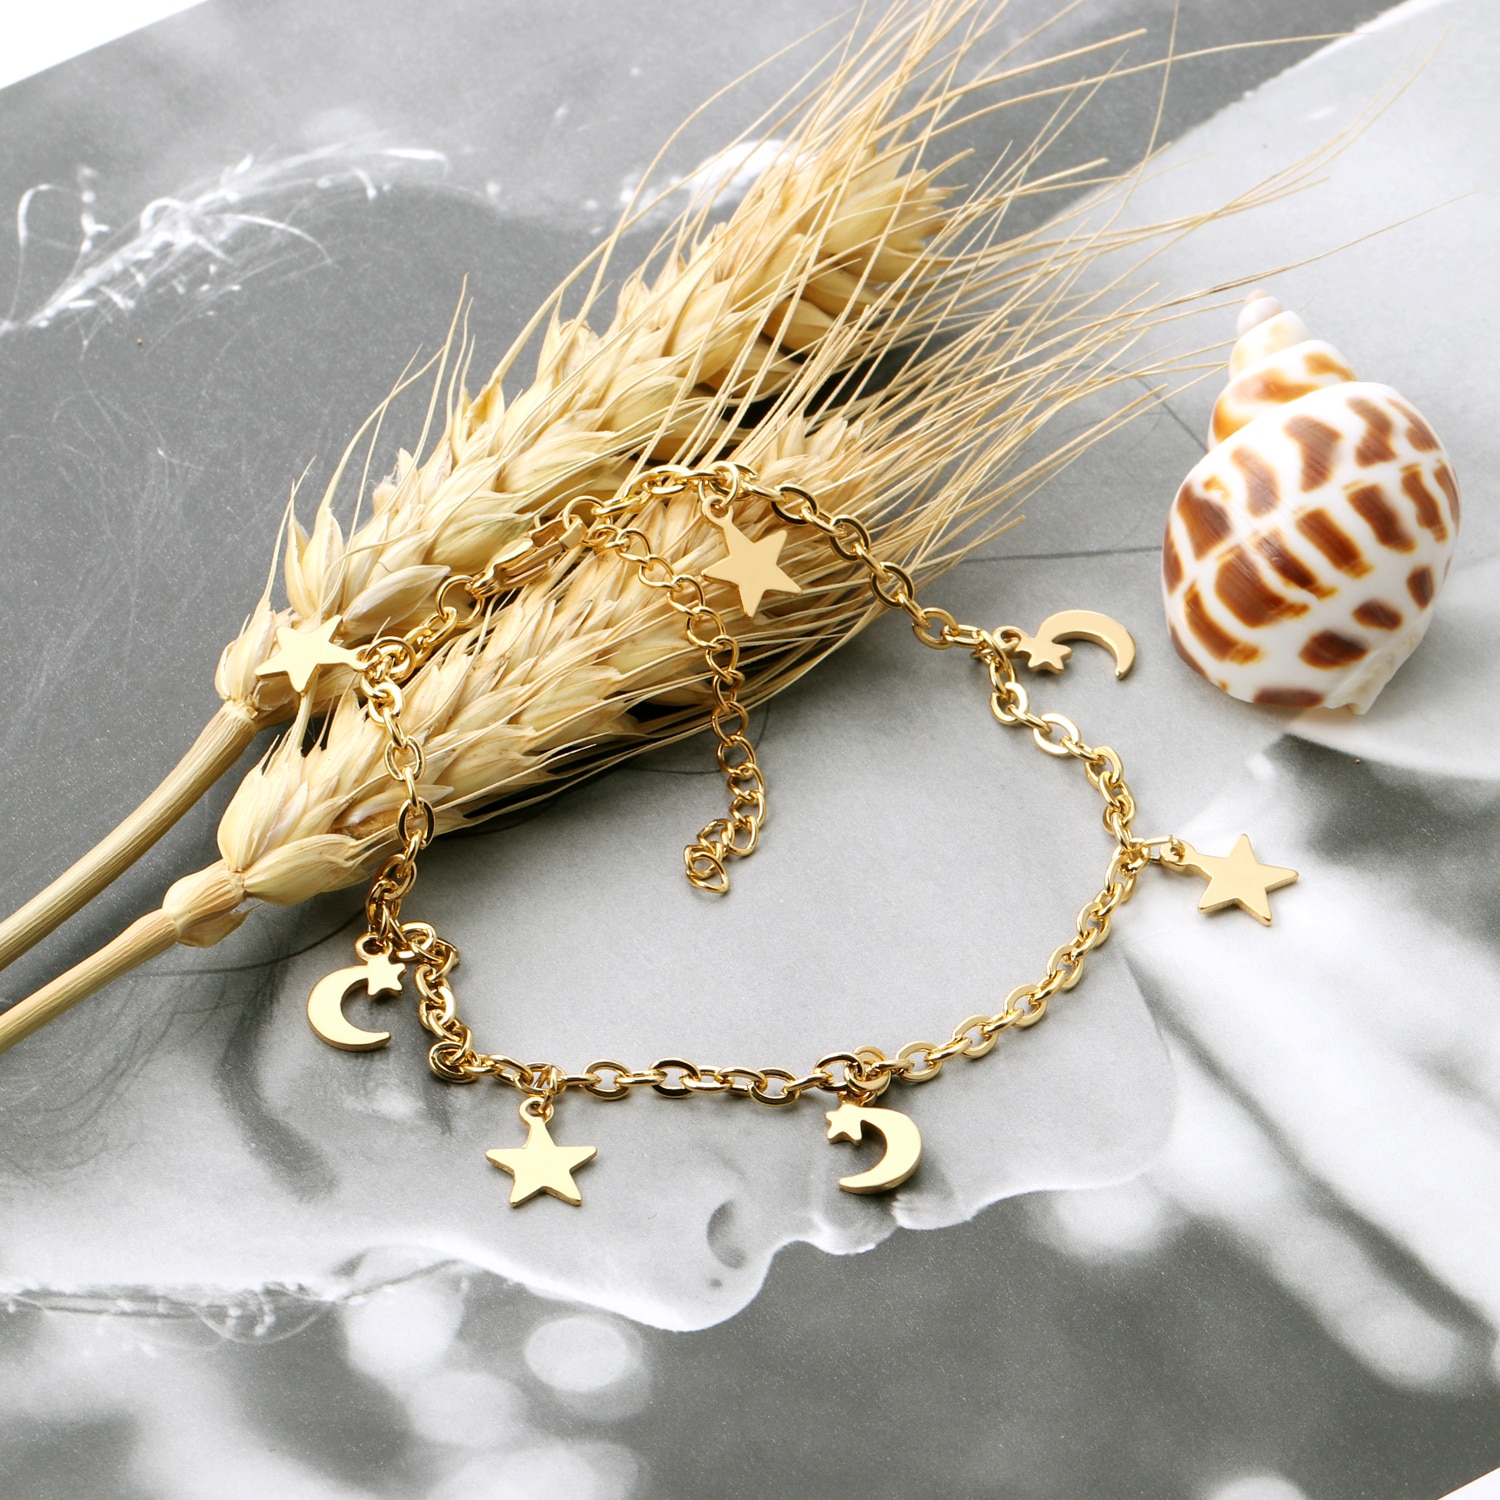 DIANA – Stainless Steel Star and Moon Anklet Anklets 8d255f28538fbae46aeae7: Gold